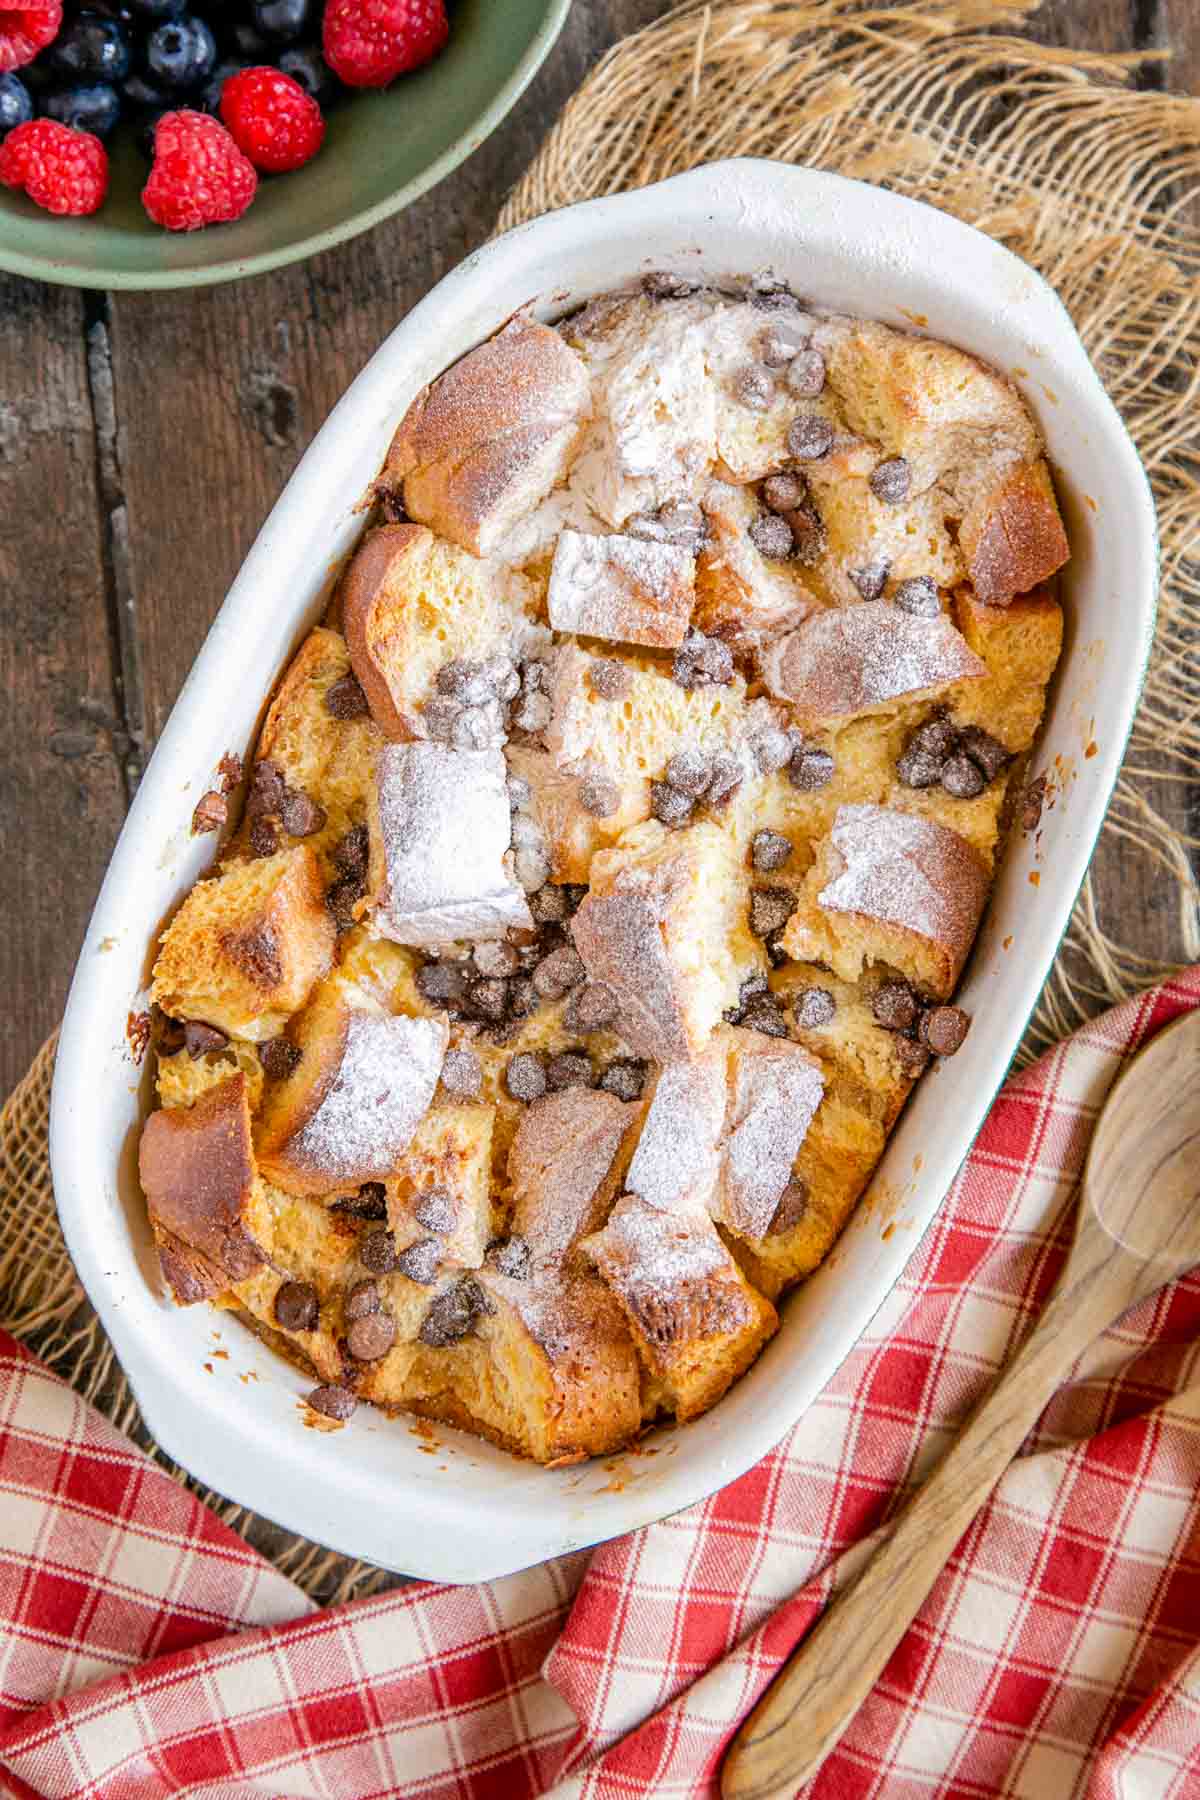 In close up, from above, the deliciously fluffy Irish cream bread and butter pudding in its serving dish.